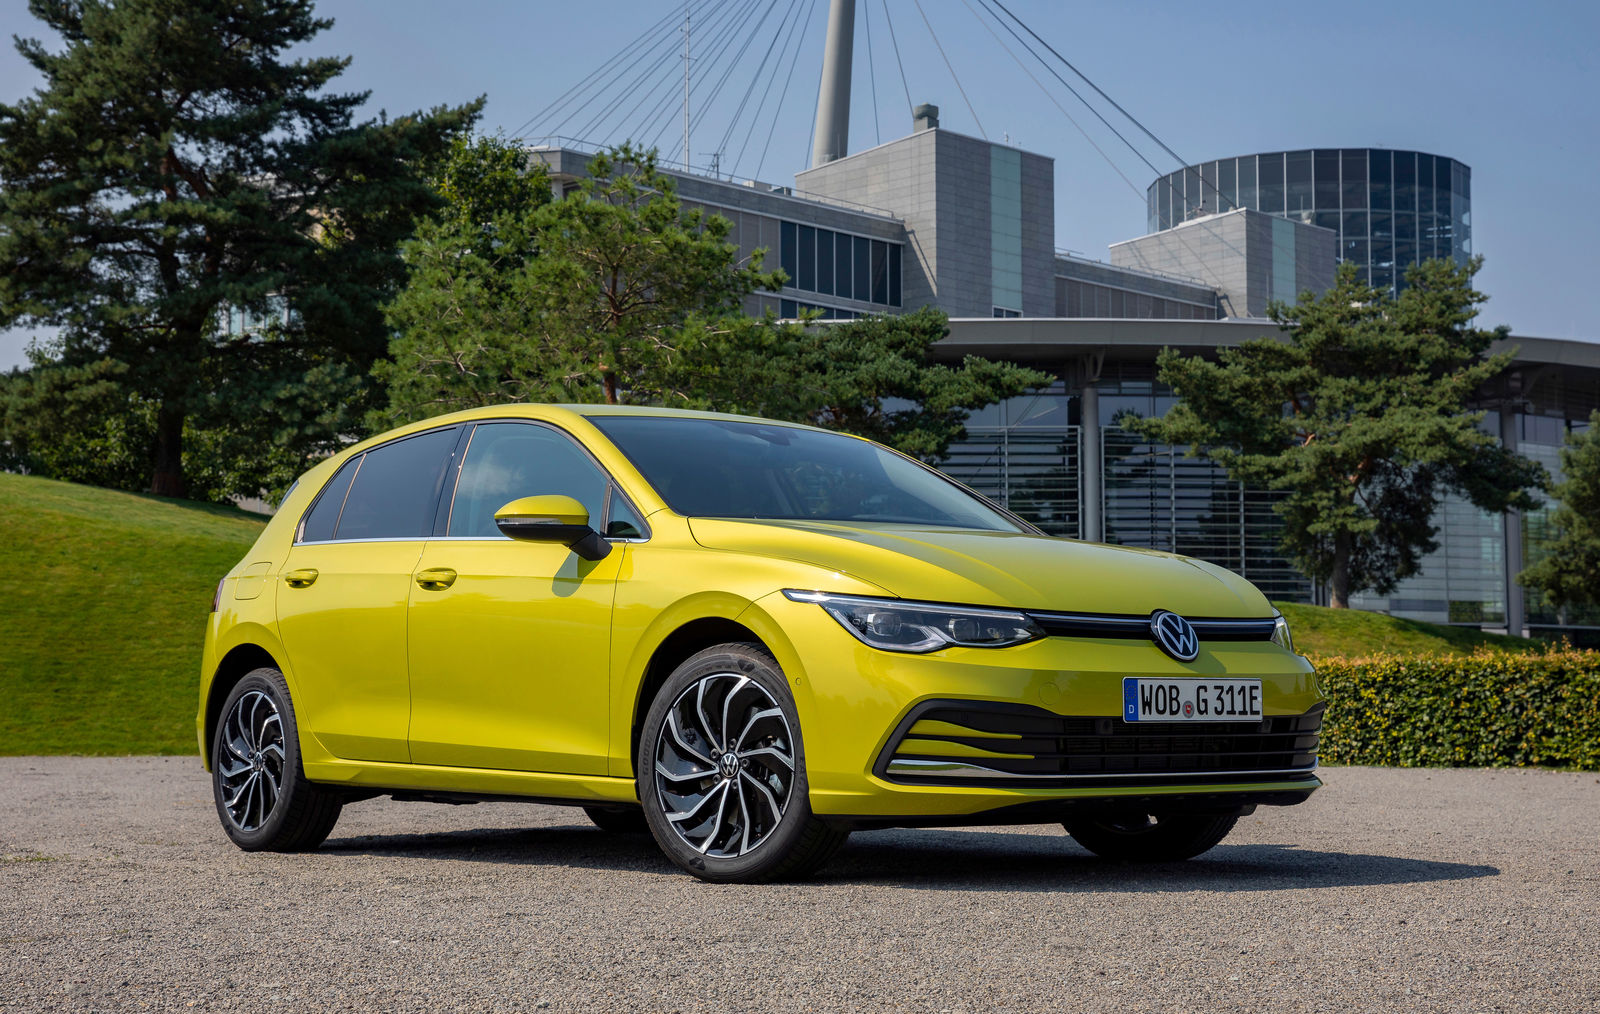 Golf eHybrid and Golf GTE – the plug-in hybrid in detail